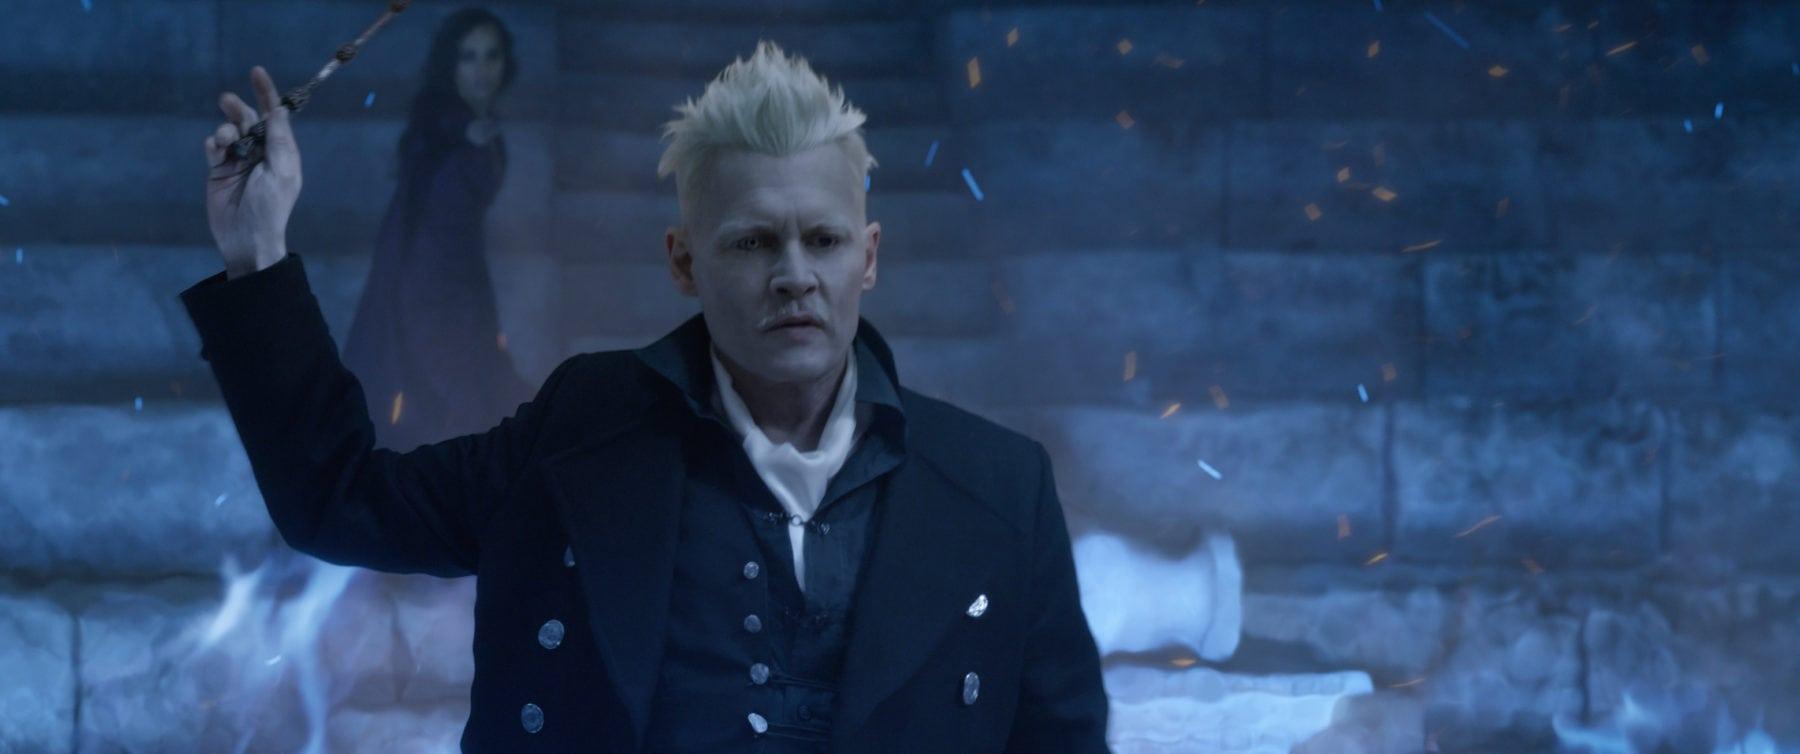 Fantastic Beasts: The Crimes of Grindelwald gets a batch of new image